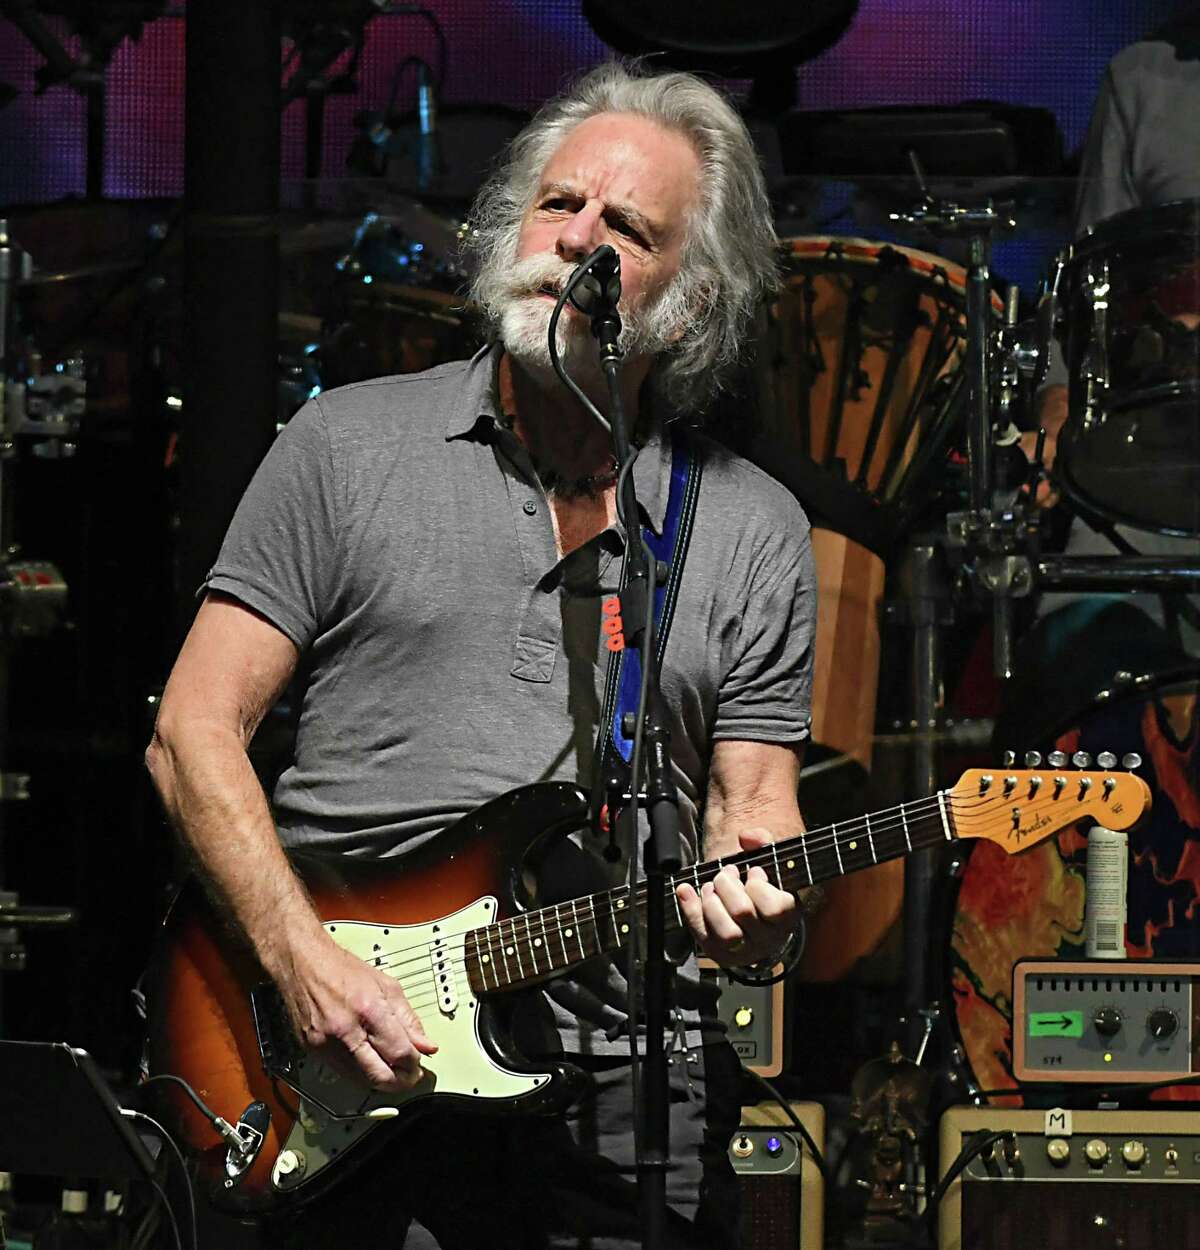 Bob Weir of Dead & Company performs the song "Jack Straw" at Saratoga Performing Arts Center on Monday, June 11, 2018 in Saratoga Springs, N.Y. (Lori Van Buren/Times Union)